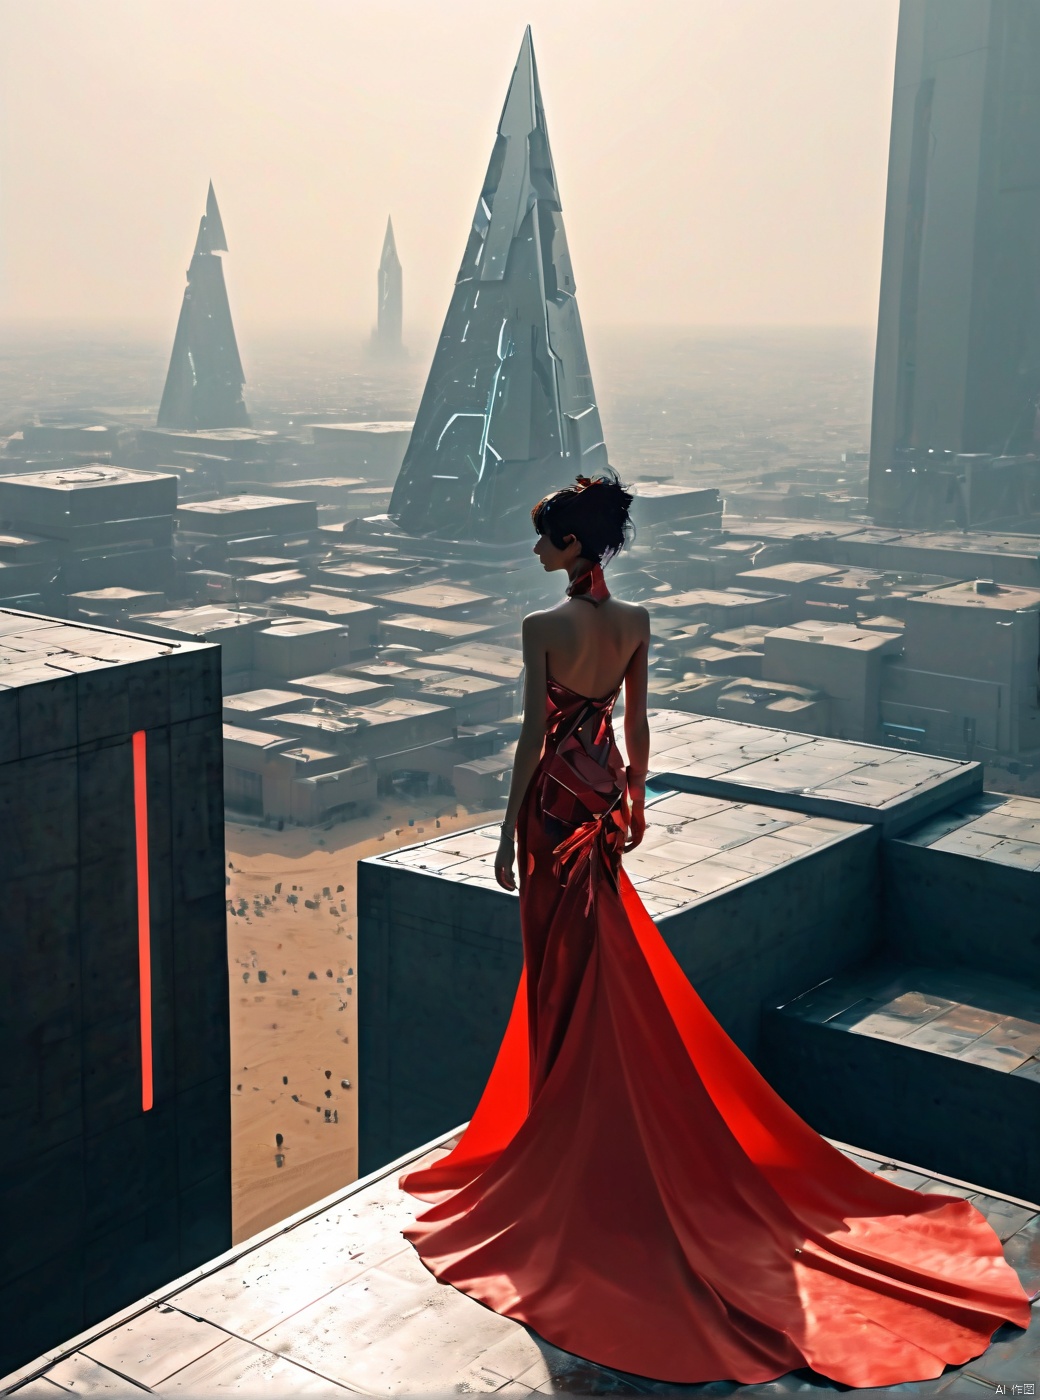 During the day, on rainy days, my whole body sparkles with red, very delicate, 8K, beautiful: 1.2. A girl appears in front of a huge (red inverted triangle shape) bird's-eye view, with a wedding dress, high heels, long legs, inverted triangle architecture, high details, complex details, super details, super clarity, high quality, overlooking the city, Three Body Civilization, sand dunes, technological sense, futurism, standing in the center of the city, her entire body (revealing her lower body), silhouette, horizon, cyberpunk, standing on the roof, looking at wide-angle lenses, high angles, futuristic style, and stunning visual background from above, mir, CDE - spaceship, pyramid